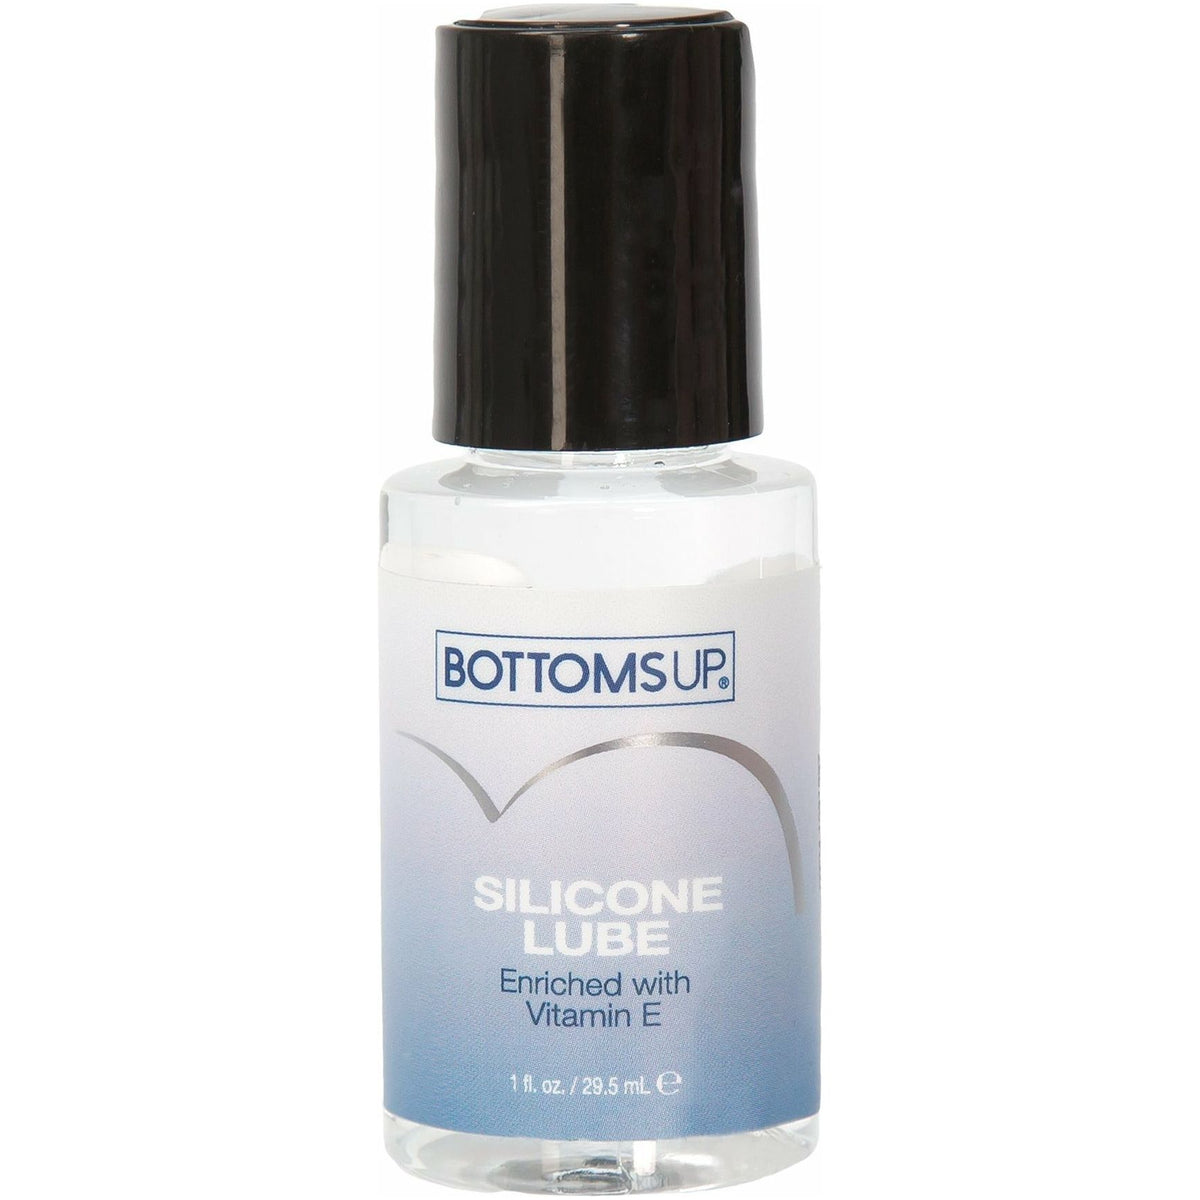 Topco Sales Bottoms up Silicone Lube - 1oz